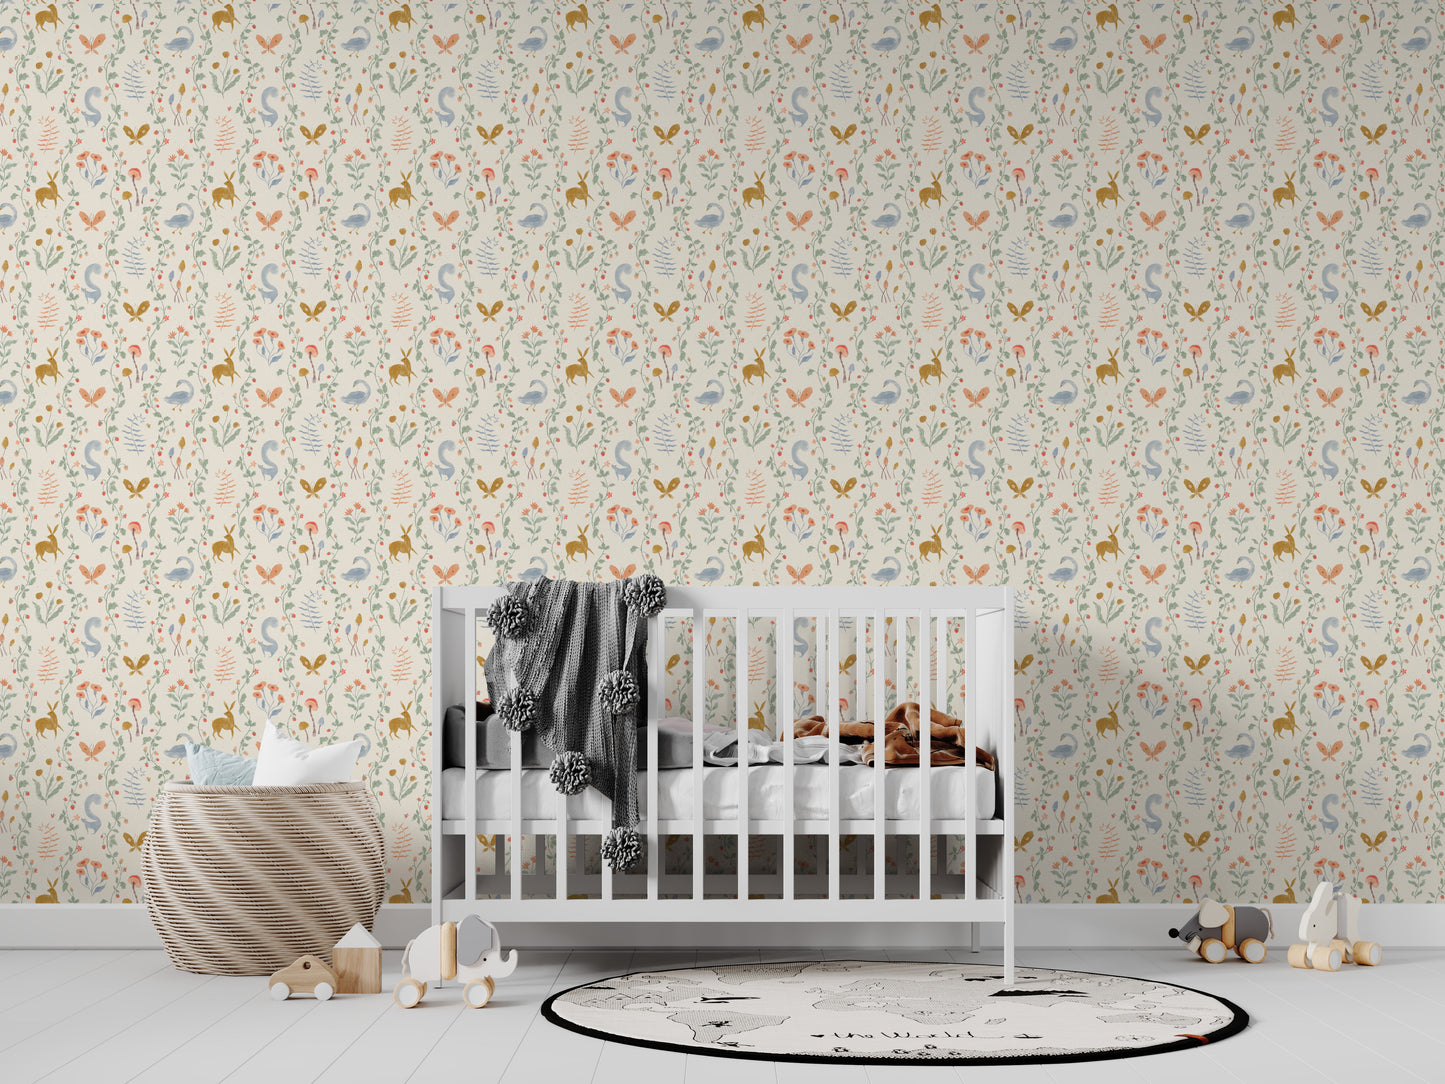 Coles Berry Patch Wallpaper Repeat Pattern - Munks and Me Wallpaper